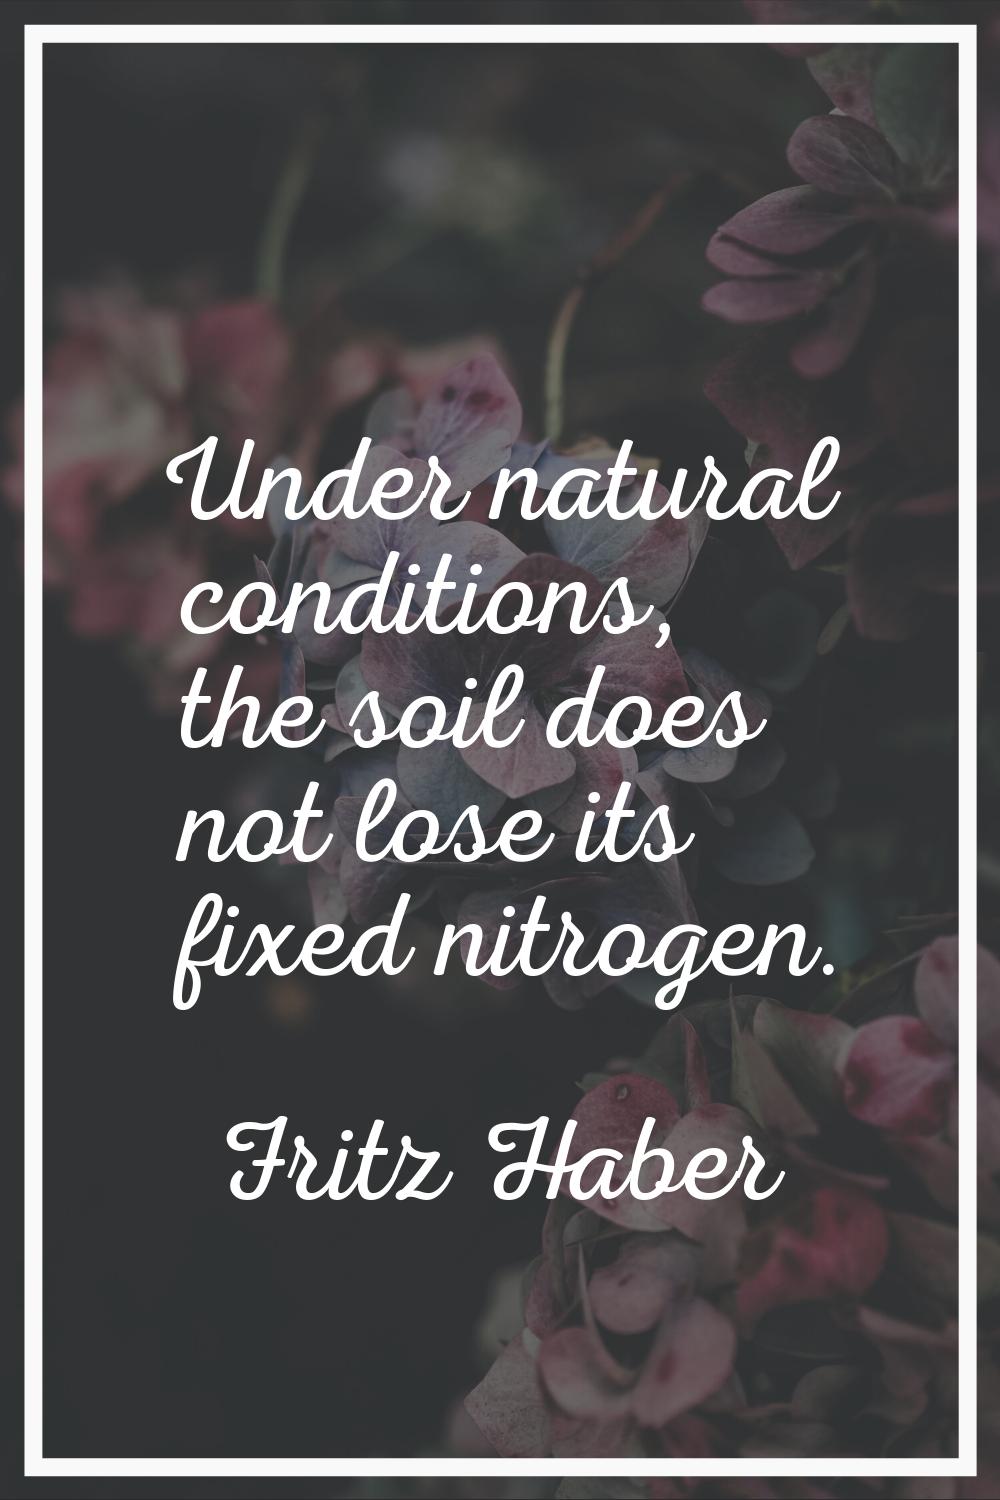 Under natural conditions, the soil does not lose its fixed nitrogen.